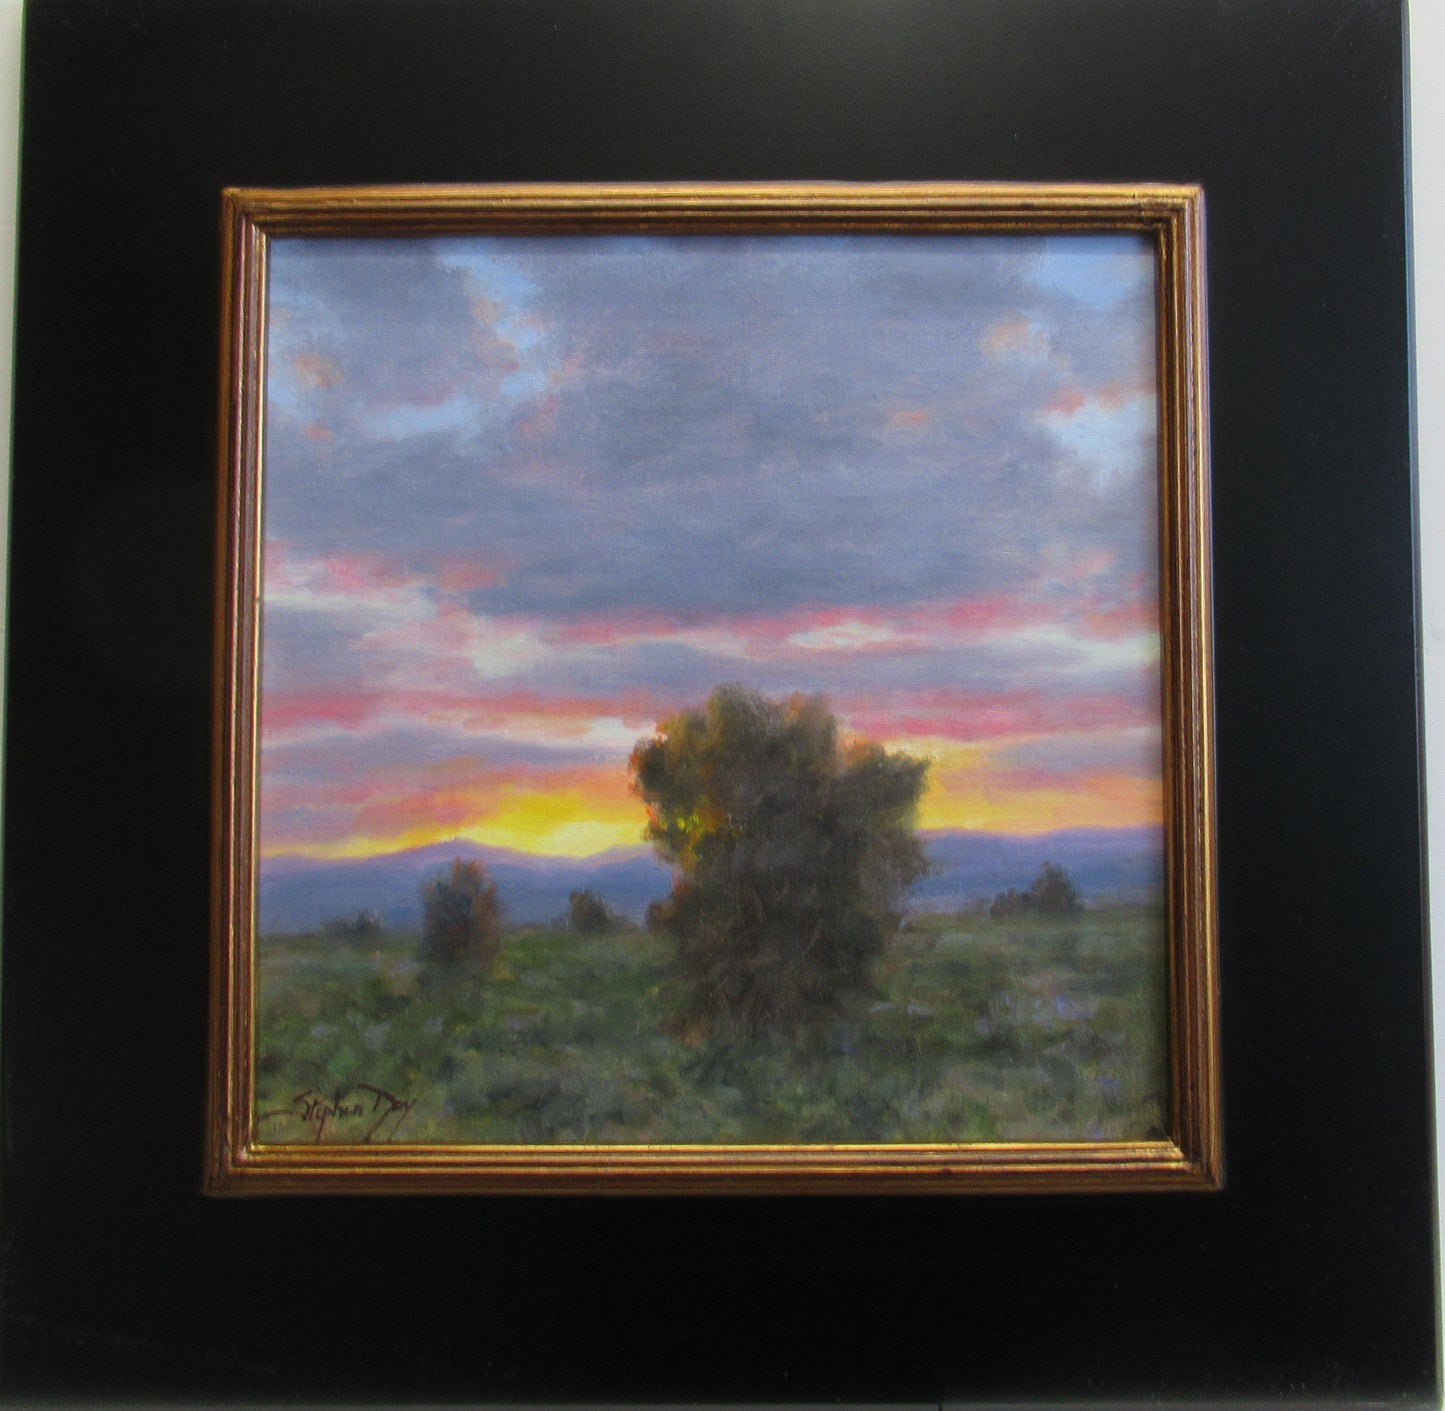 Valley Sunset-Painting-Stephen Day-Sorrel Sky Gallery